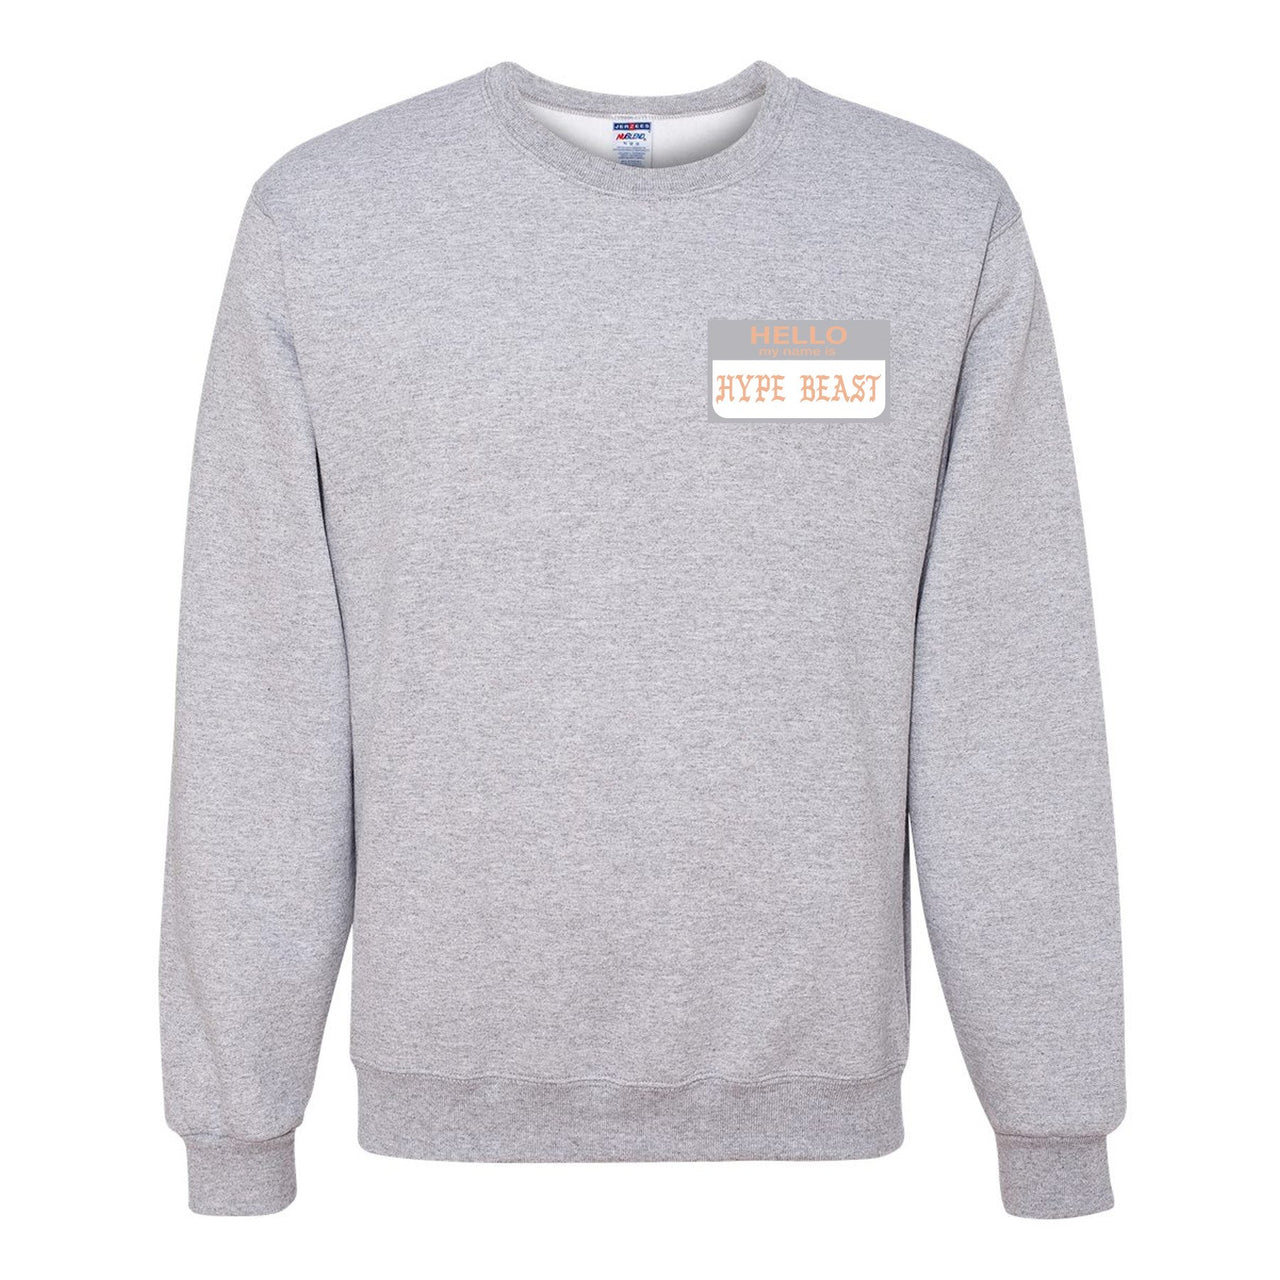 True Form v2 350s Crewneck Sweater | Hello My Name Is Hype Beast Pablo, Heathered Light Gray